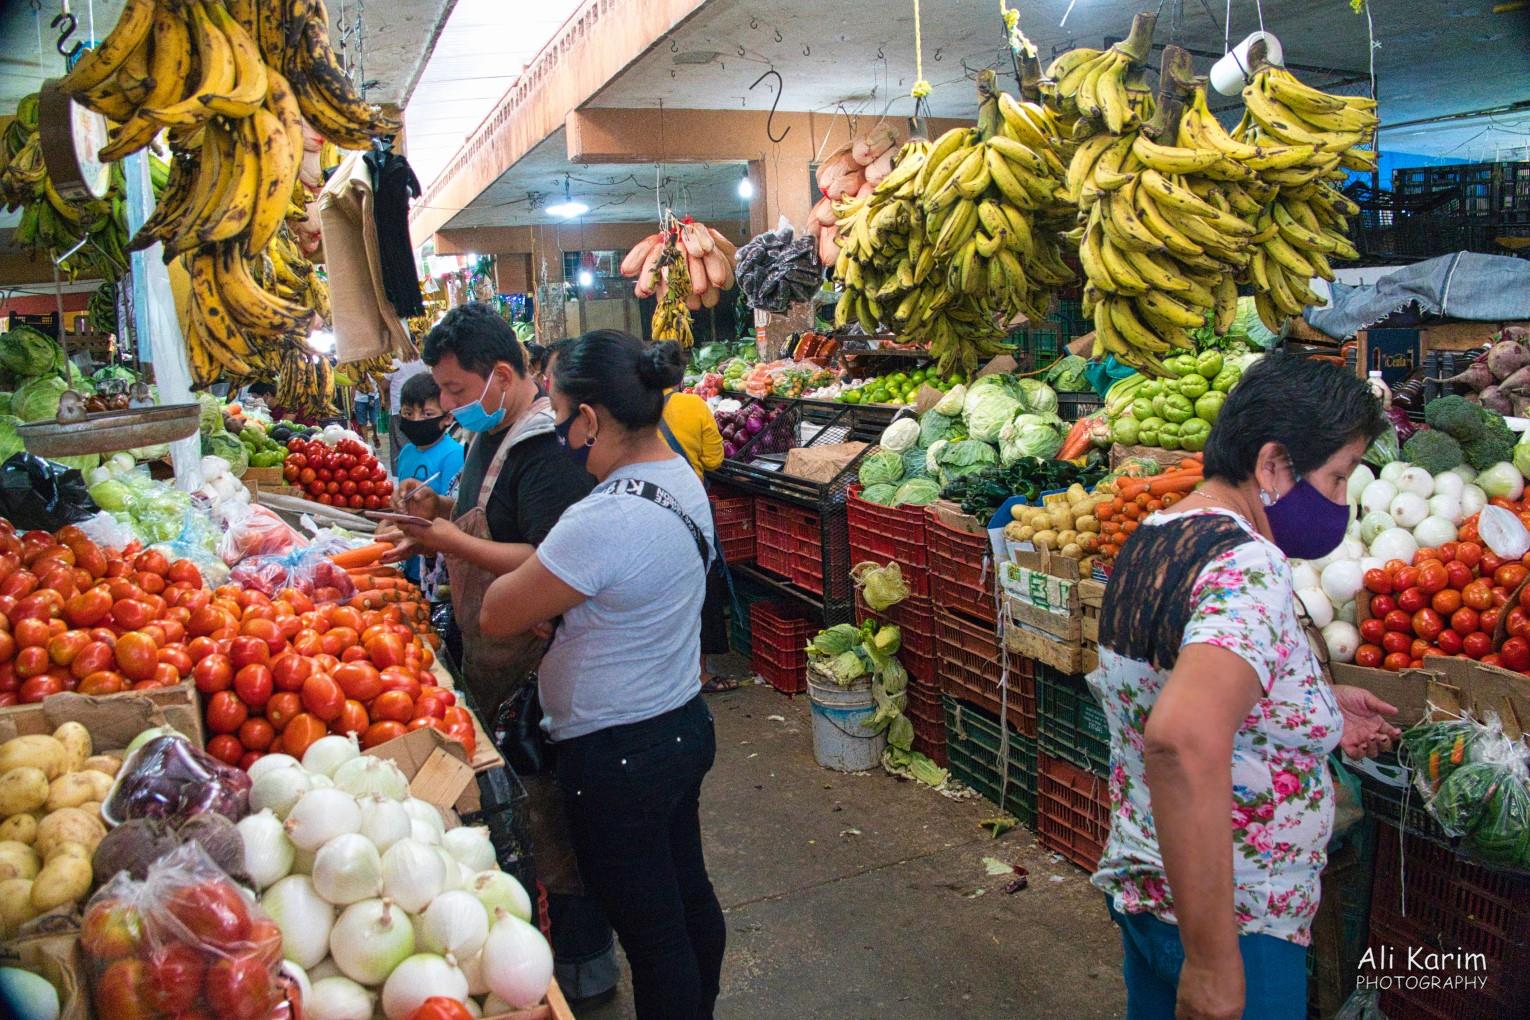 Mérida  & Campeche, Yucatan Peninsula, Mexico, Feb 2021, No trip is complete without a visit to the market